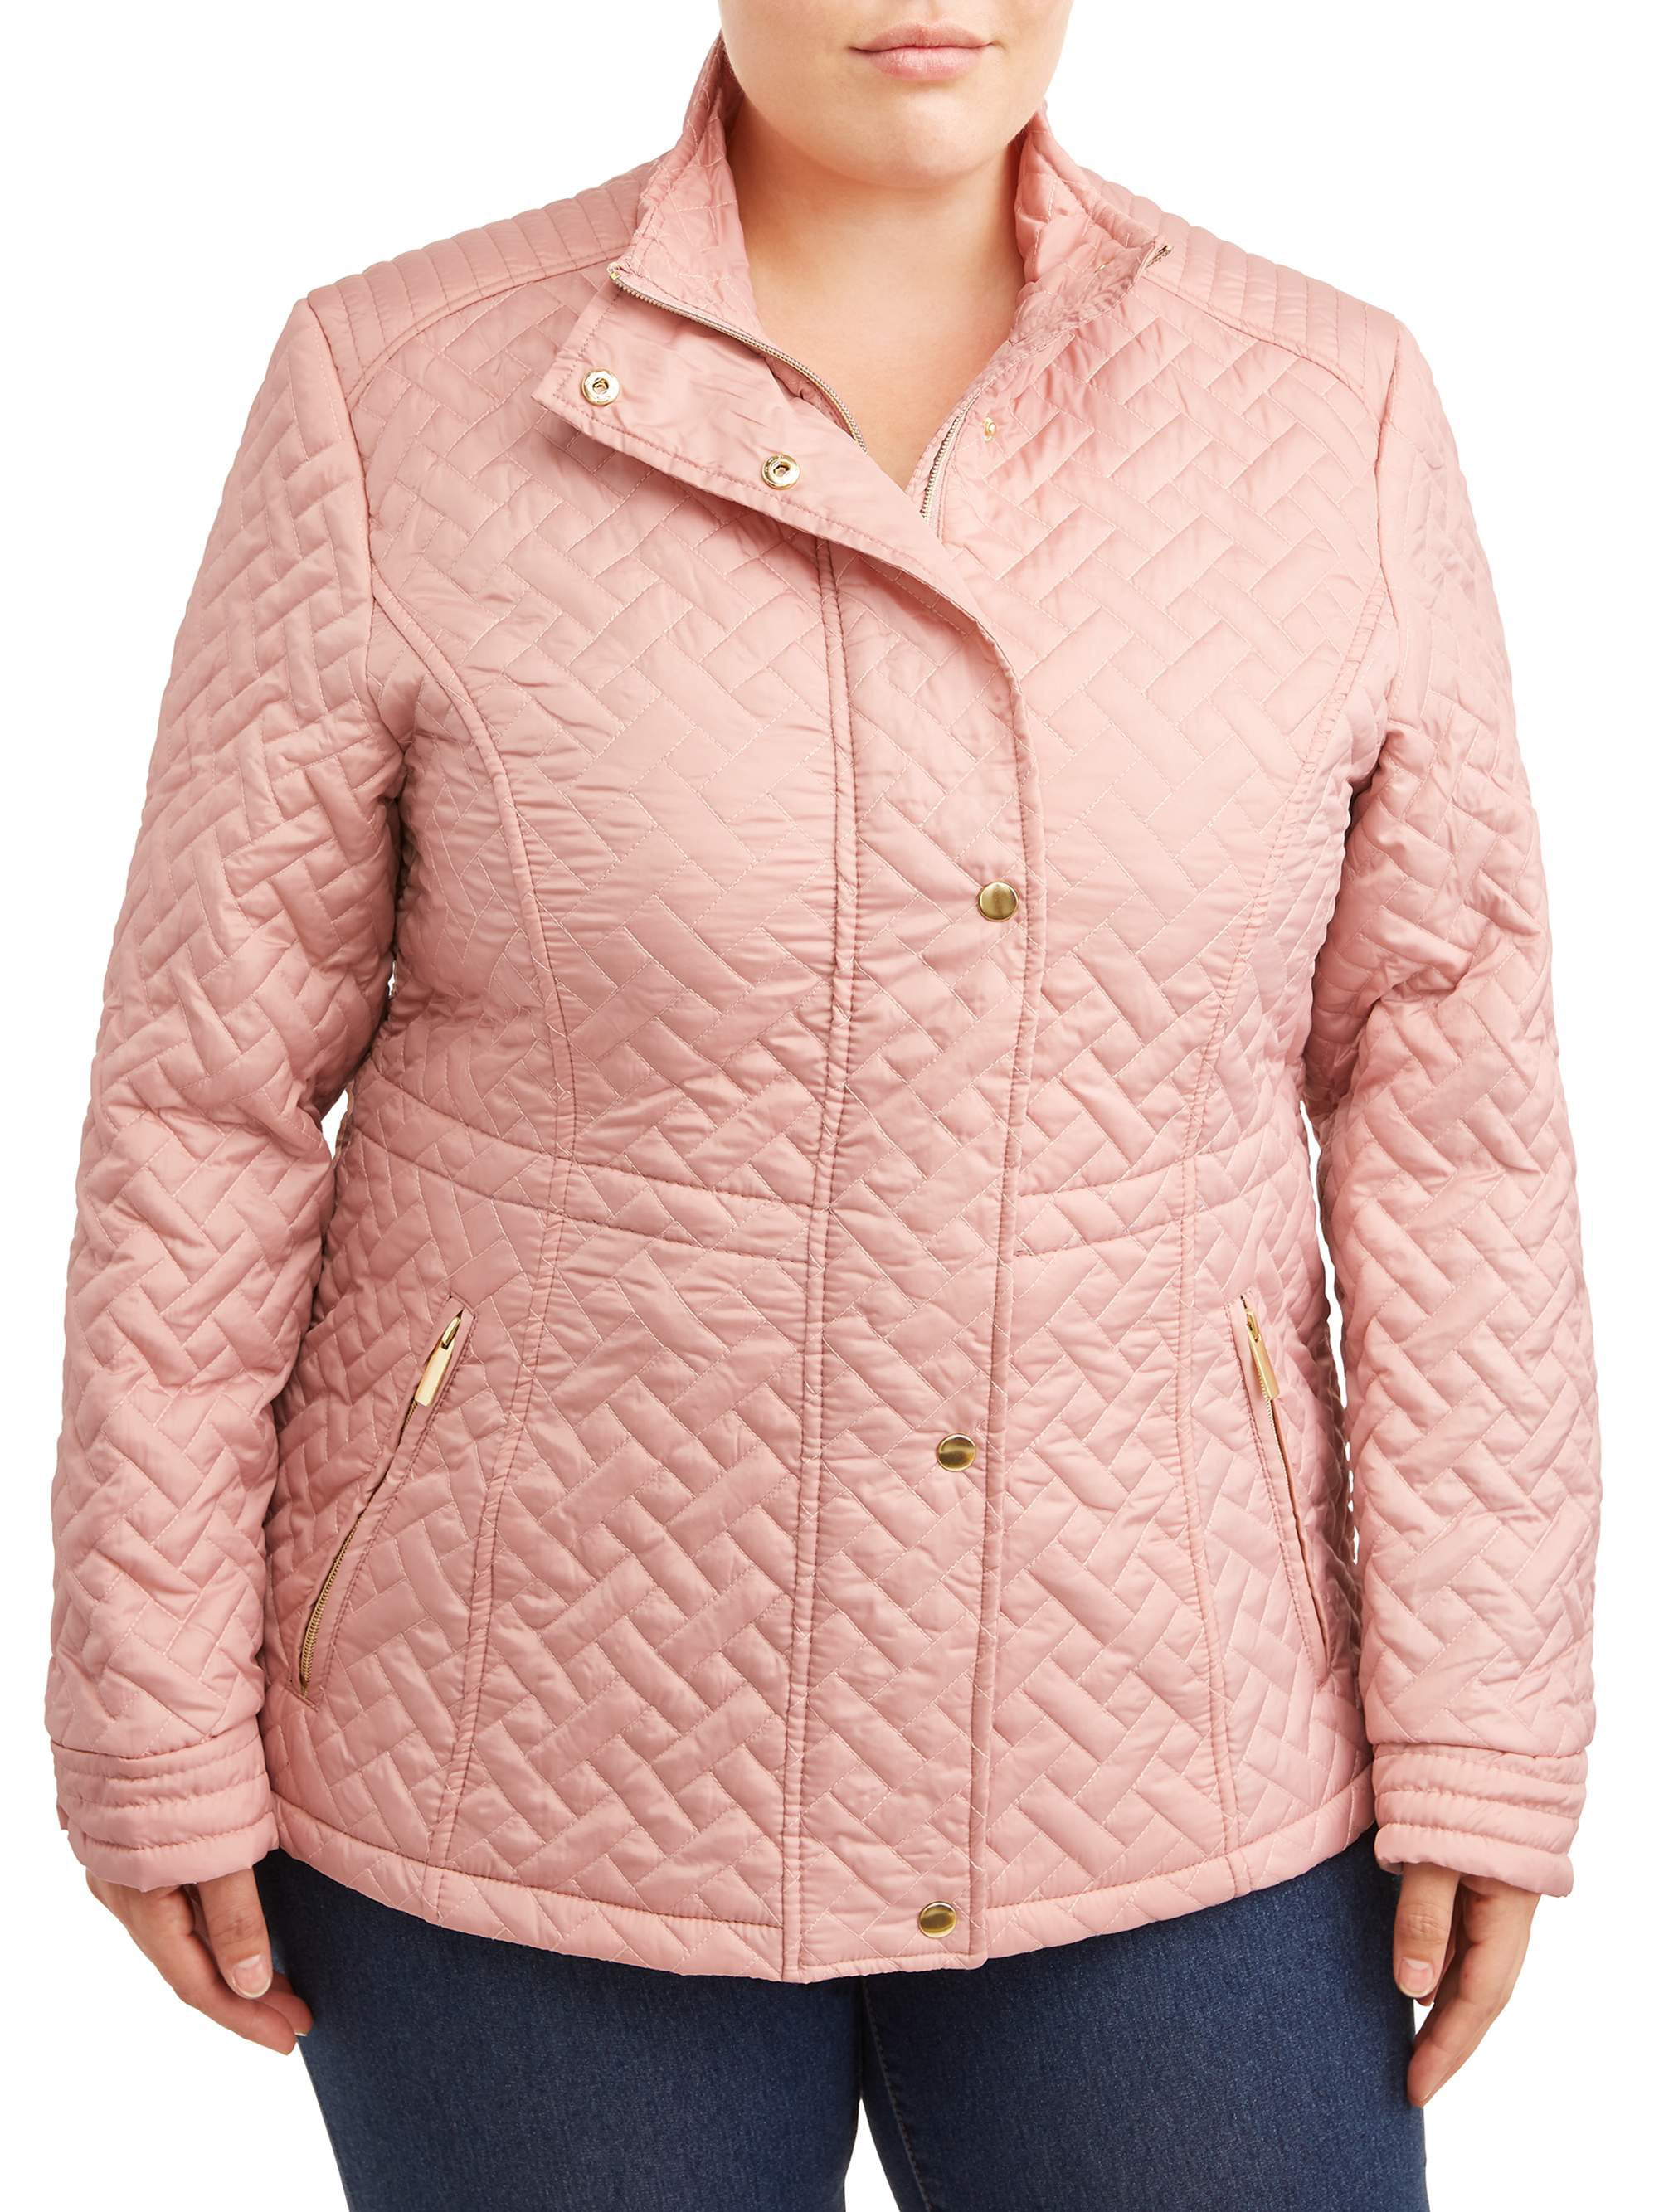 Big Chill Womens Basket Weave Quilted Anorak Jacket